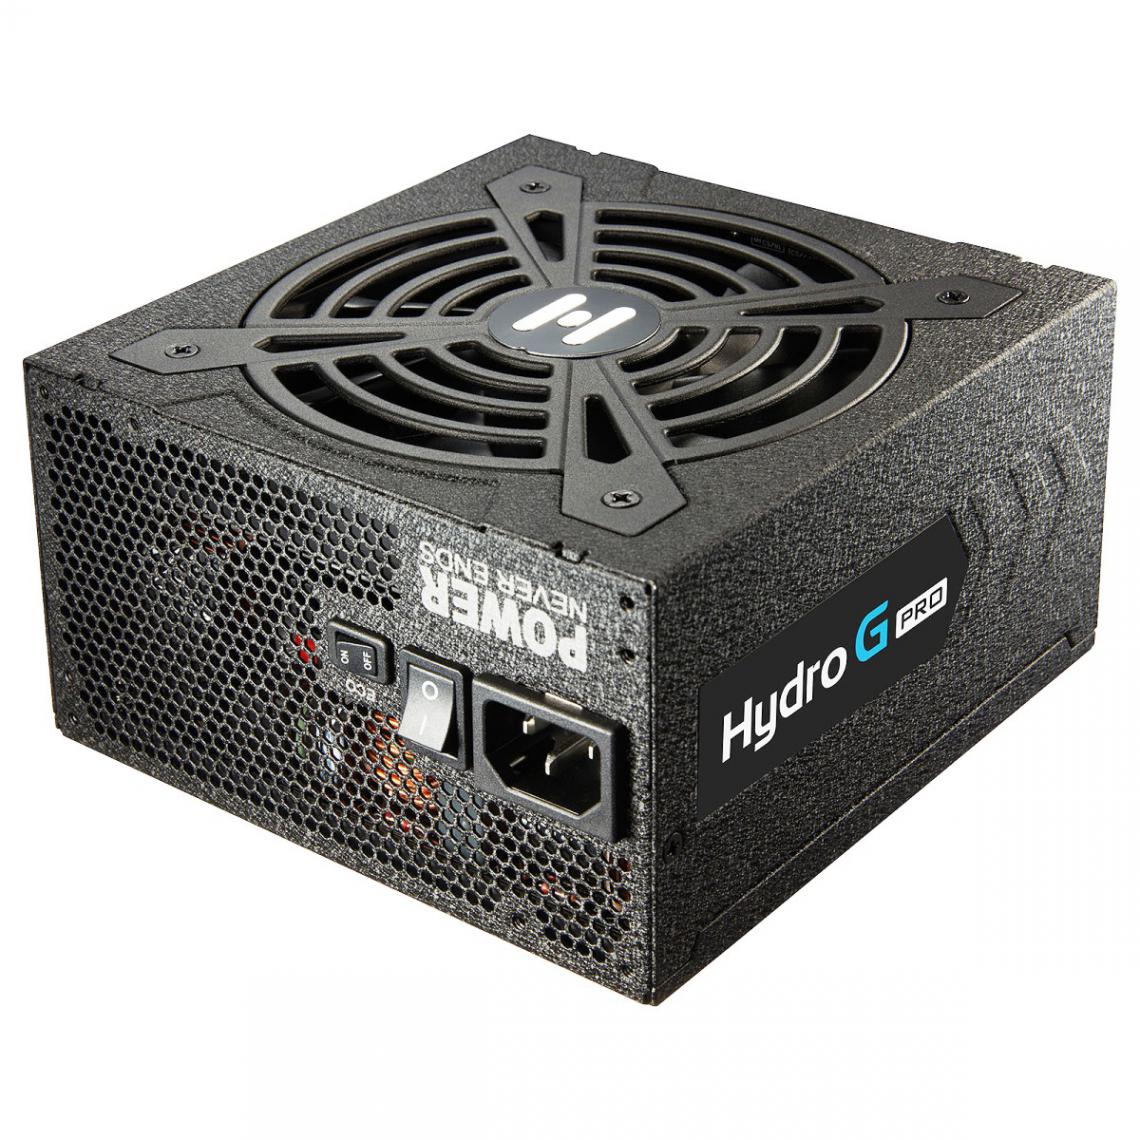 Fsp - HYDRO G PRO Gold 1000W - 80+ - Alimentation modulaire